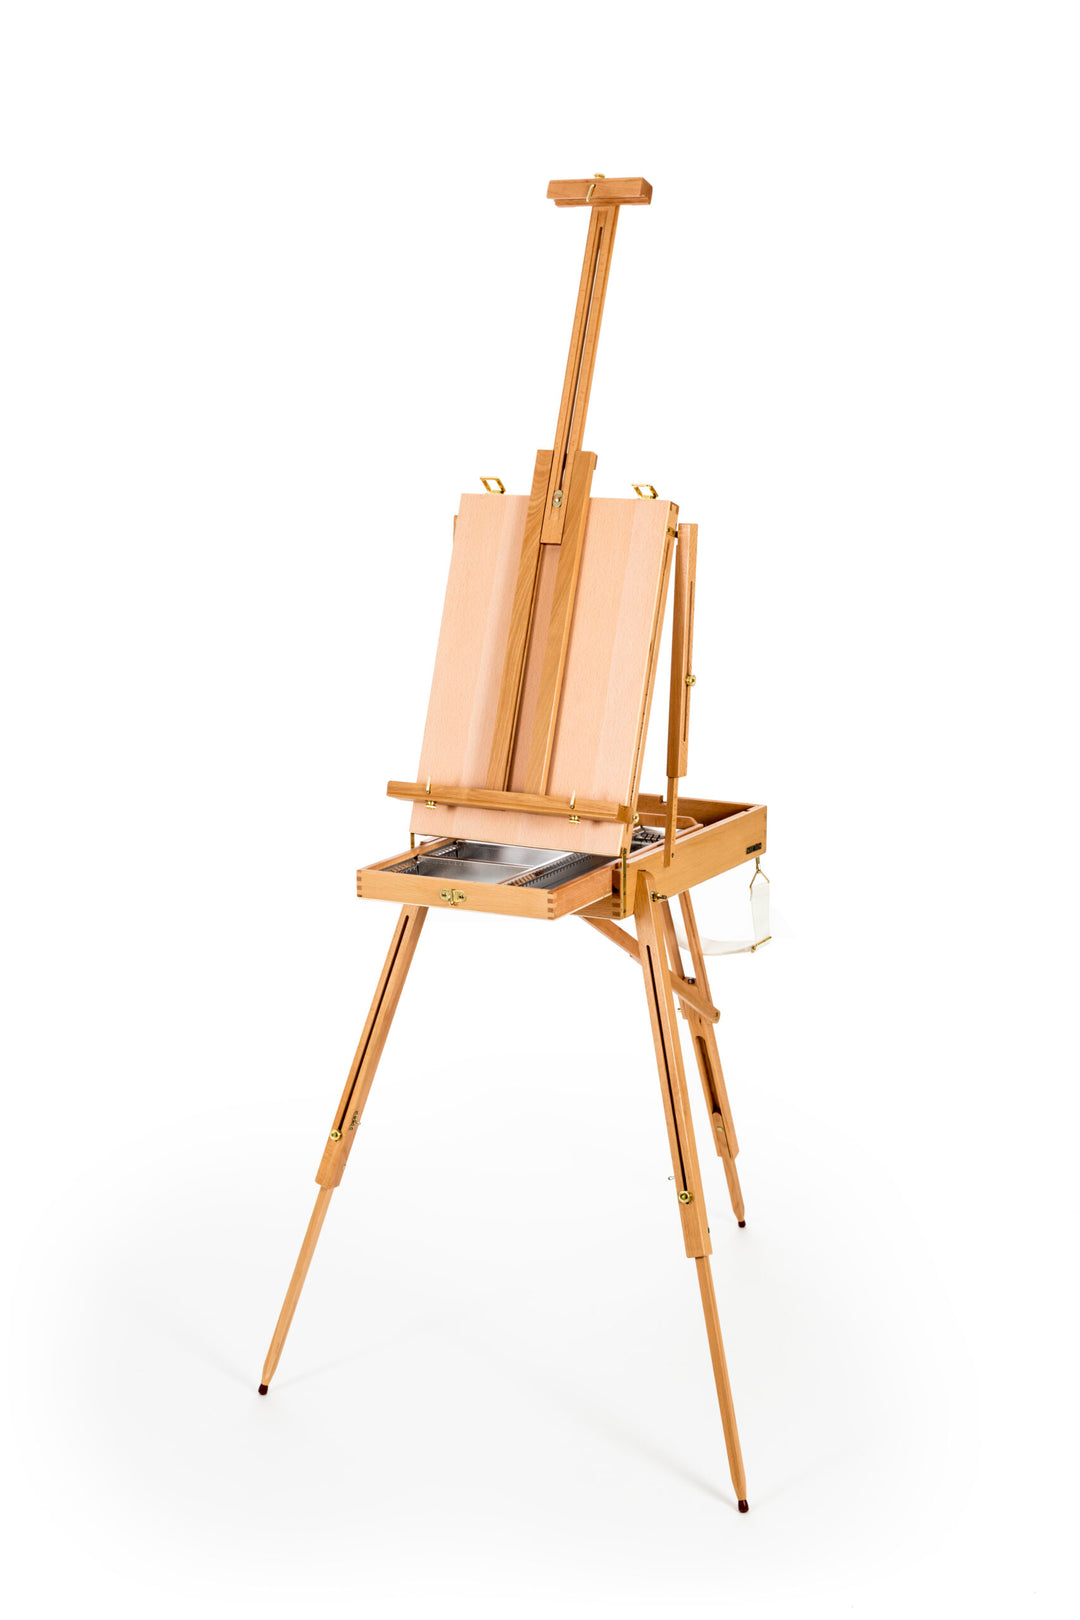 Loxley Paris full size Sketch Box Easel